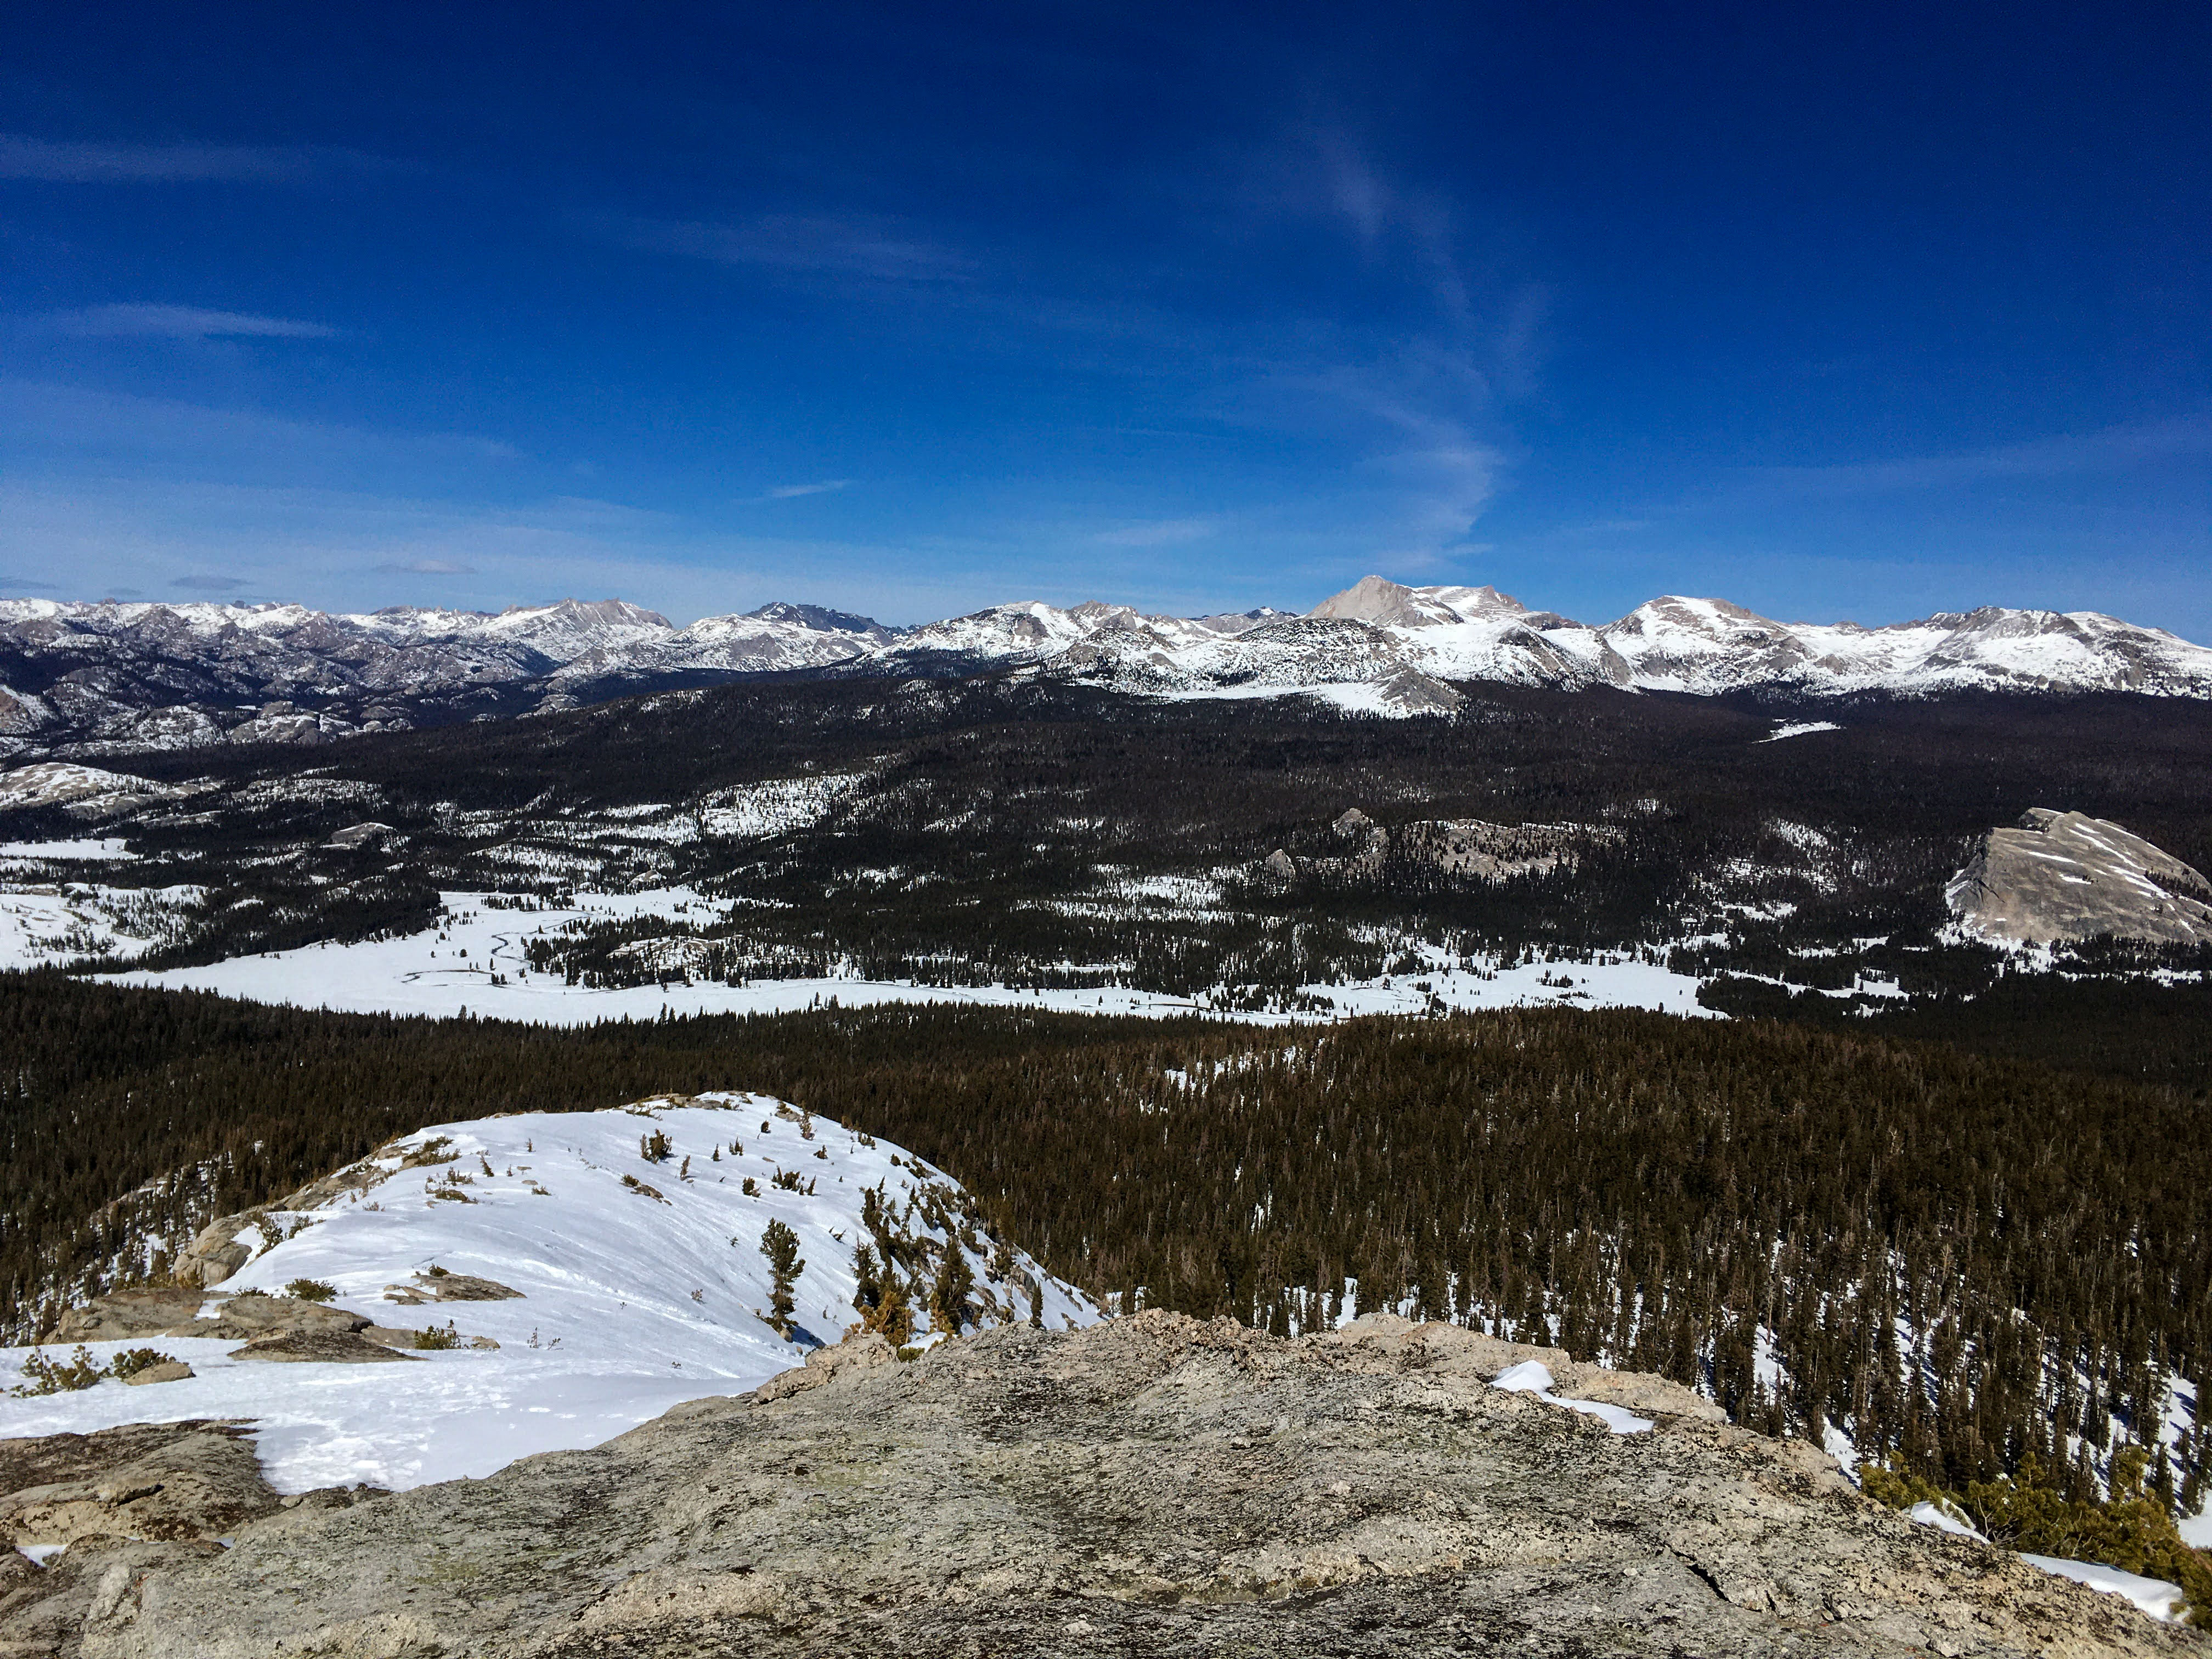 Snowy Tuolumne Meadows as seen from above